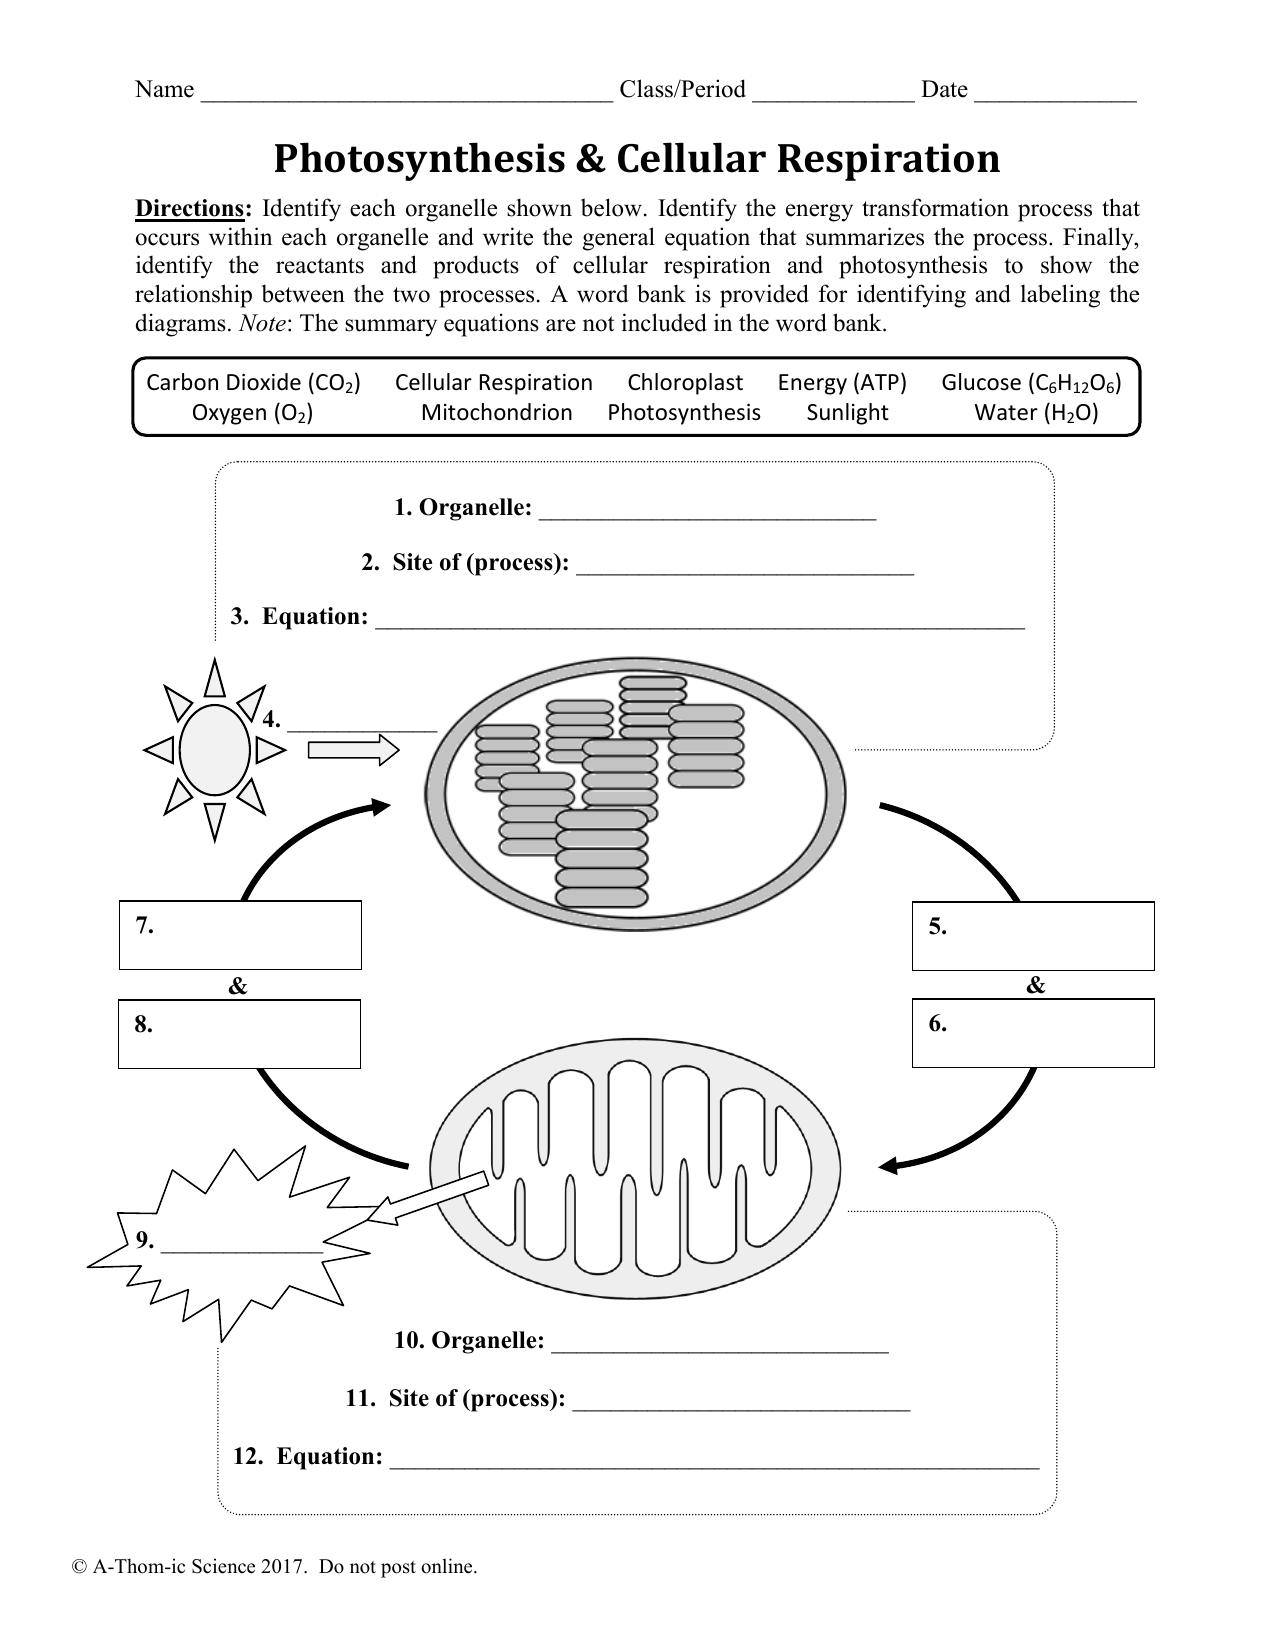 photosynthesis-and-cellular-respiration-worksheet